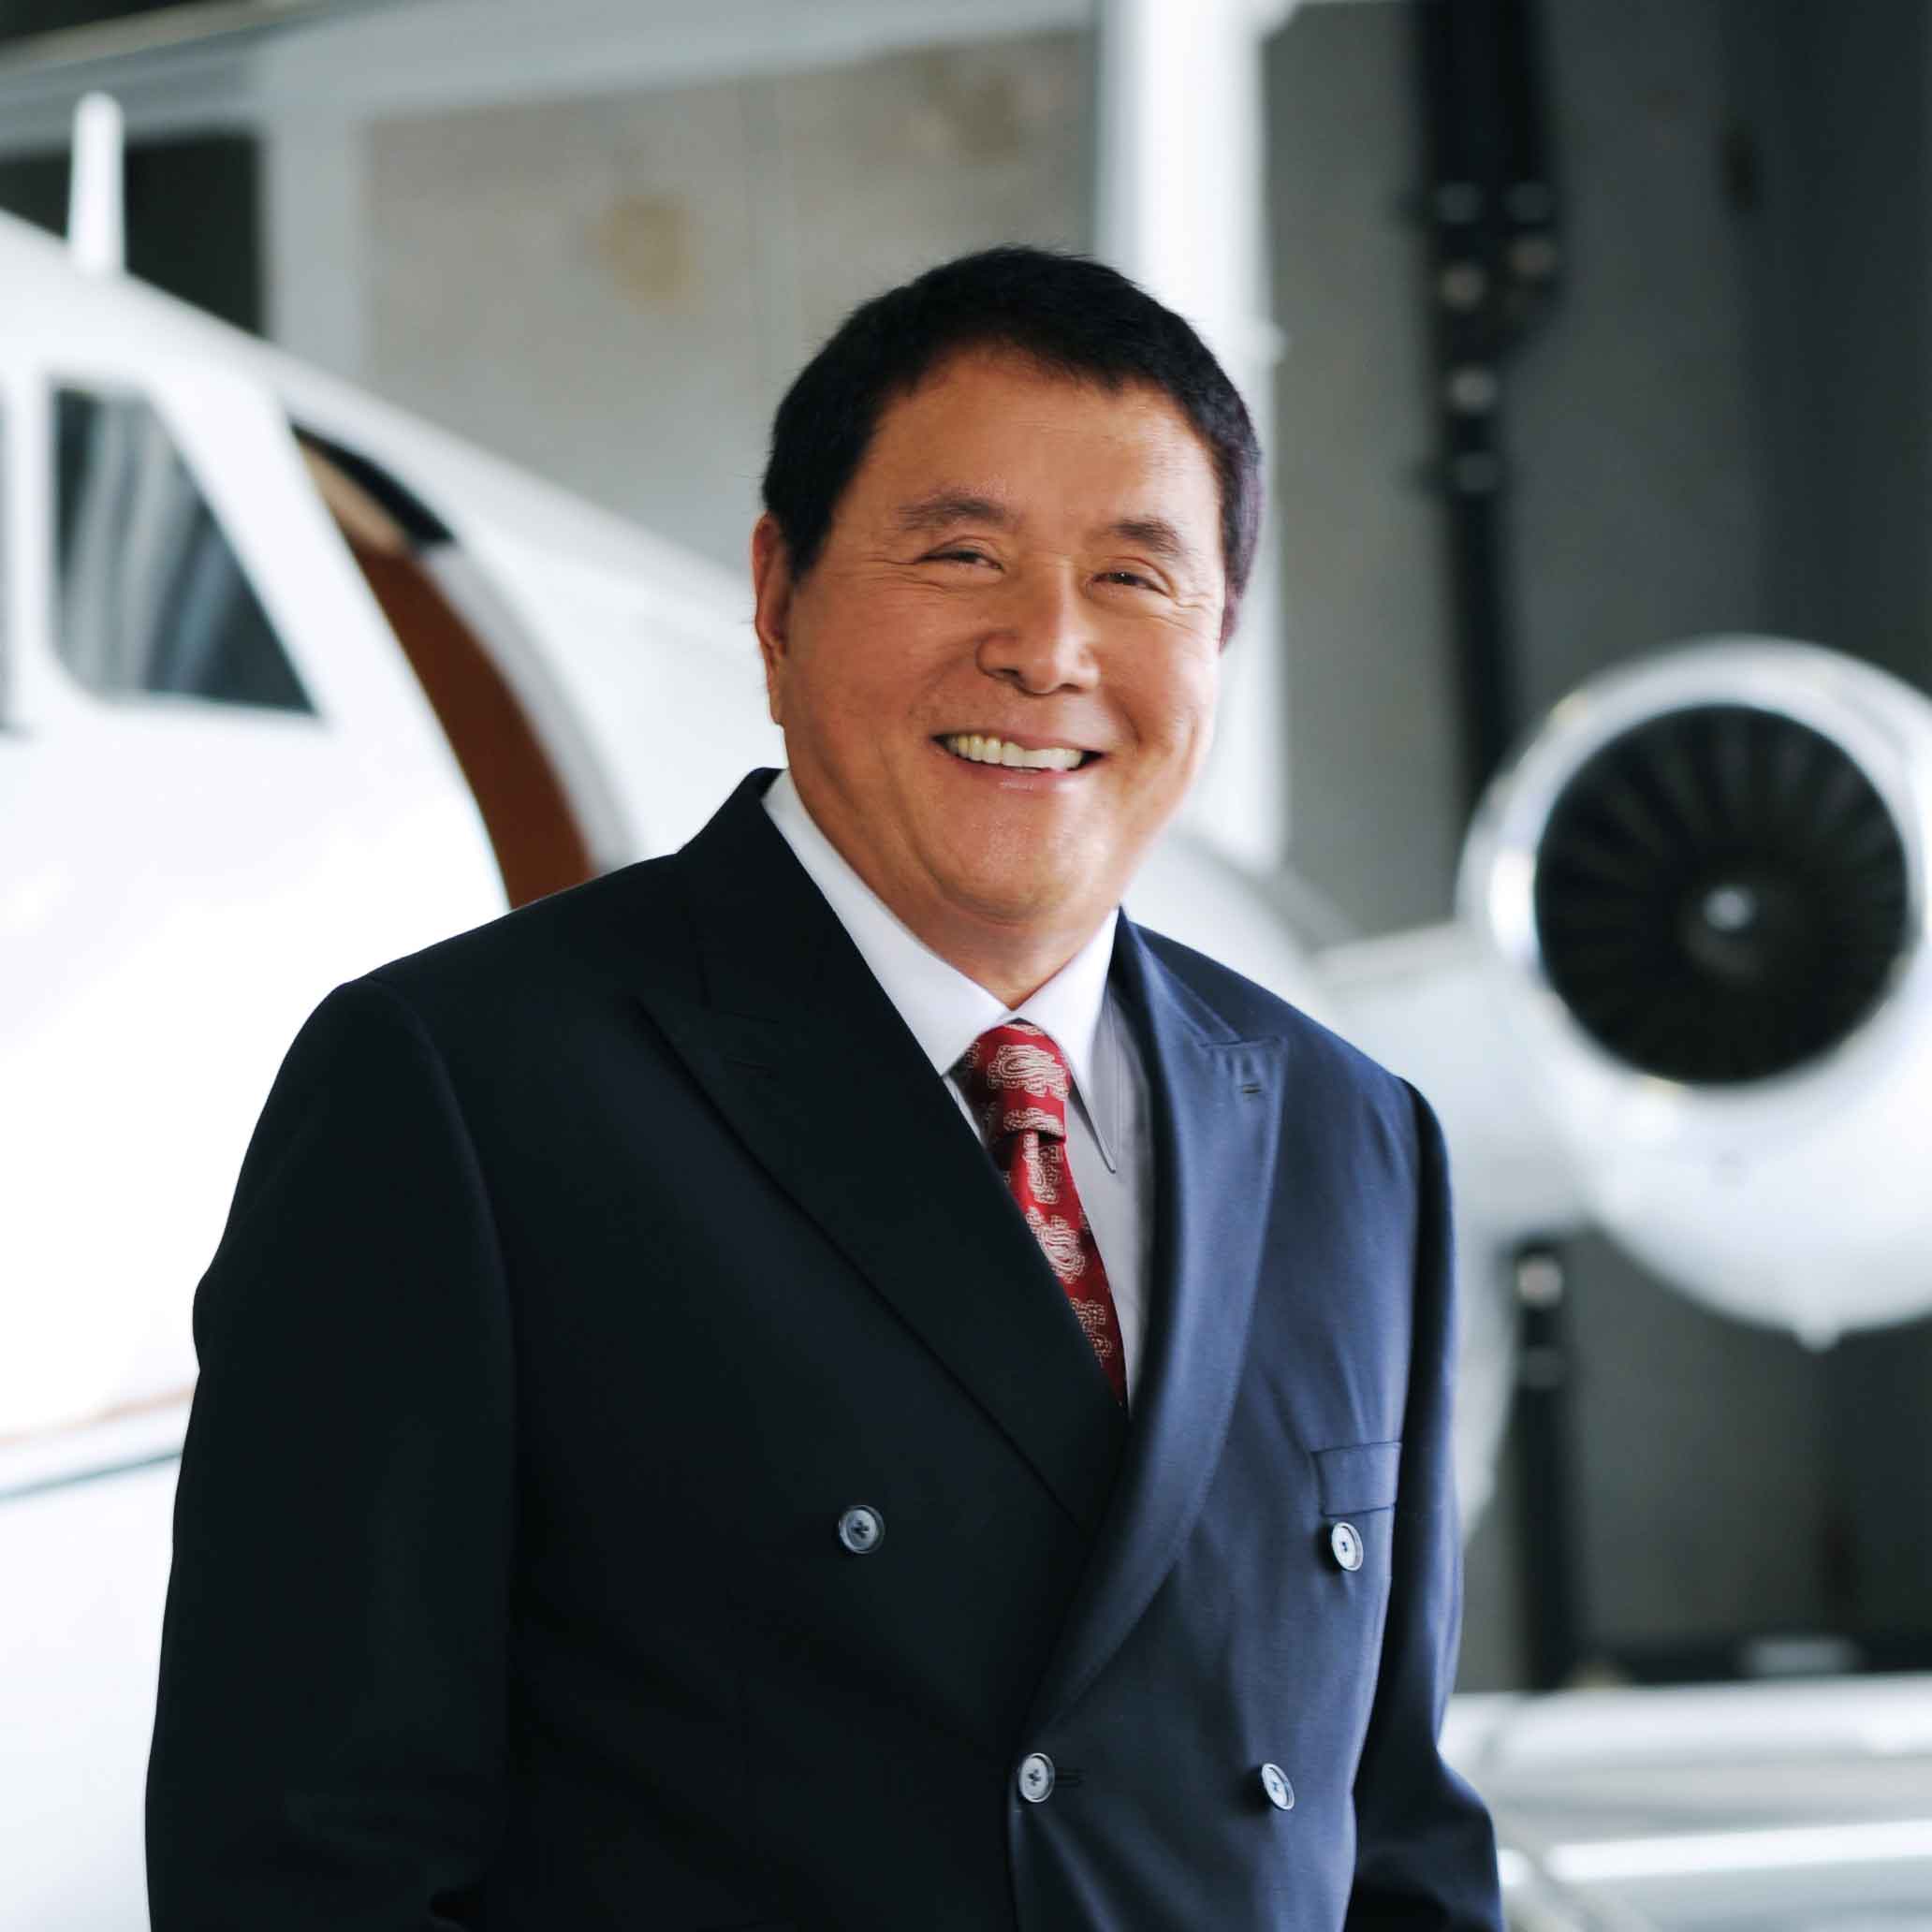 Robert Kiyosaki standing by a private jet in an airplane hanger.